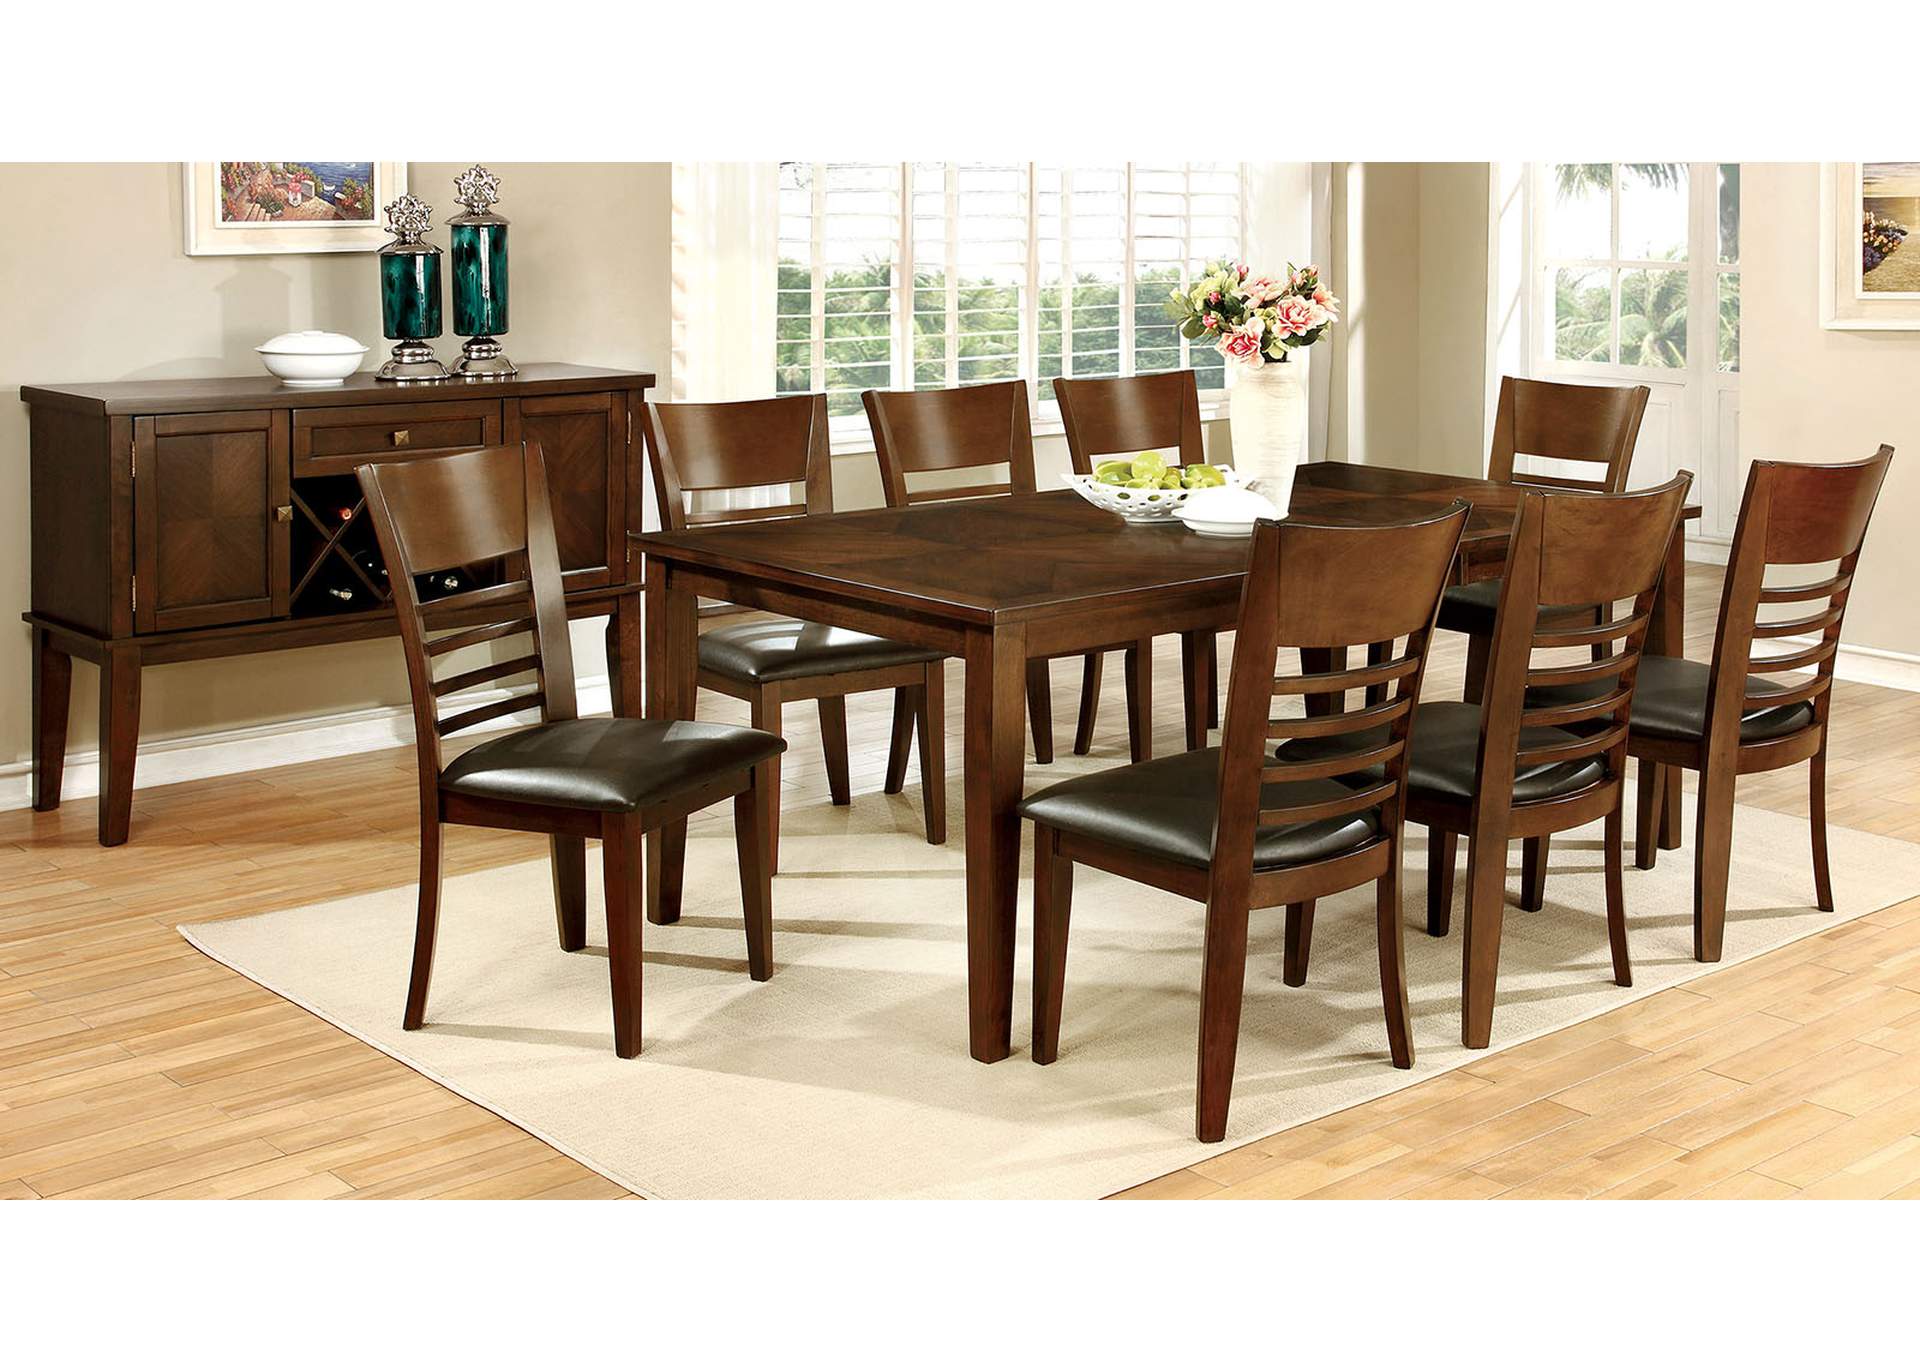 Hillsview I Brown 78" Extension Leaf Dining Table w/6 Side Chair,Furniture of America